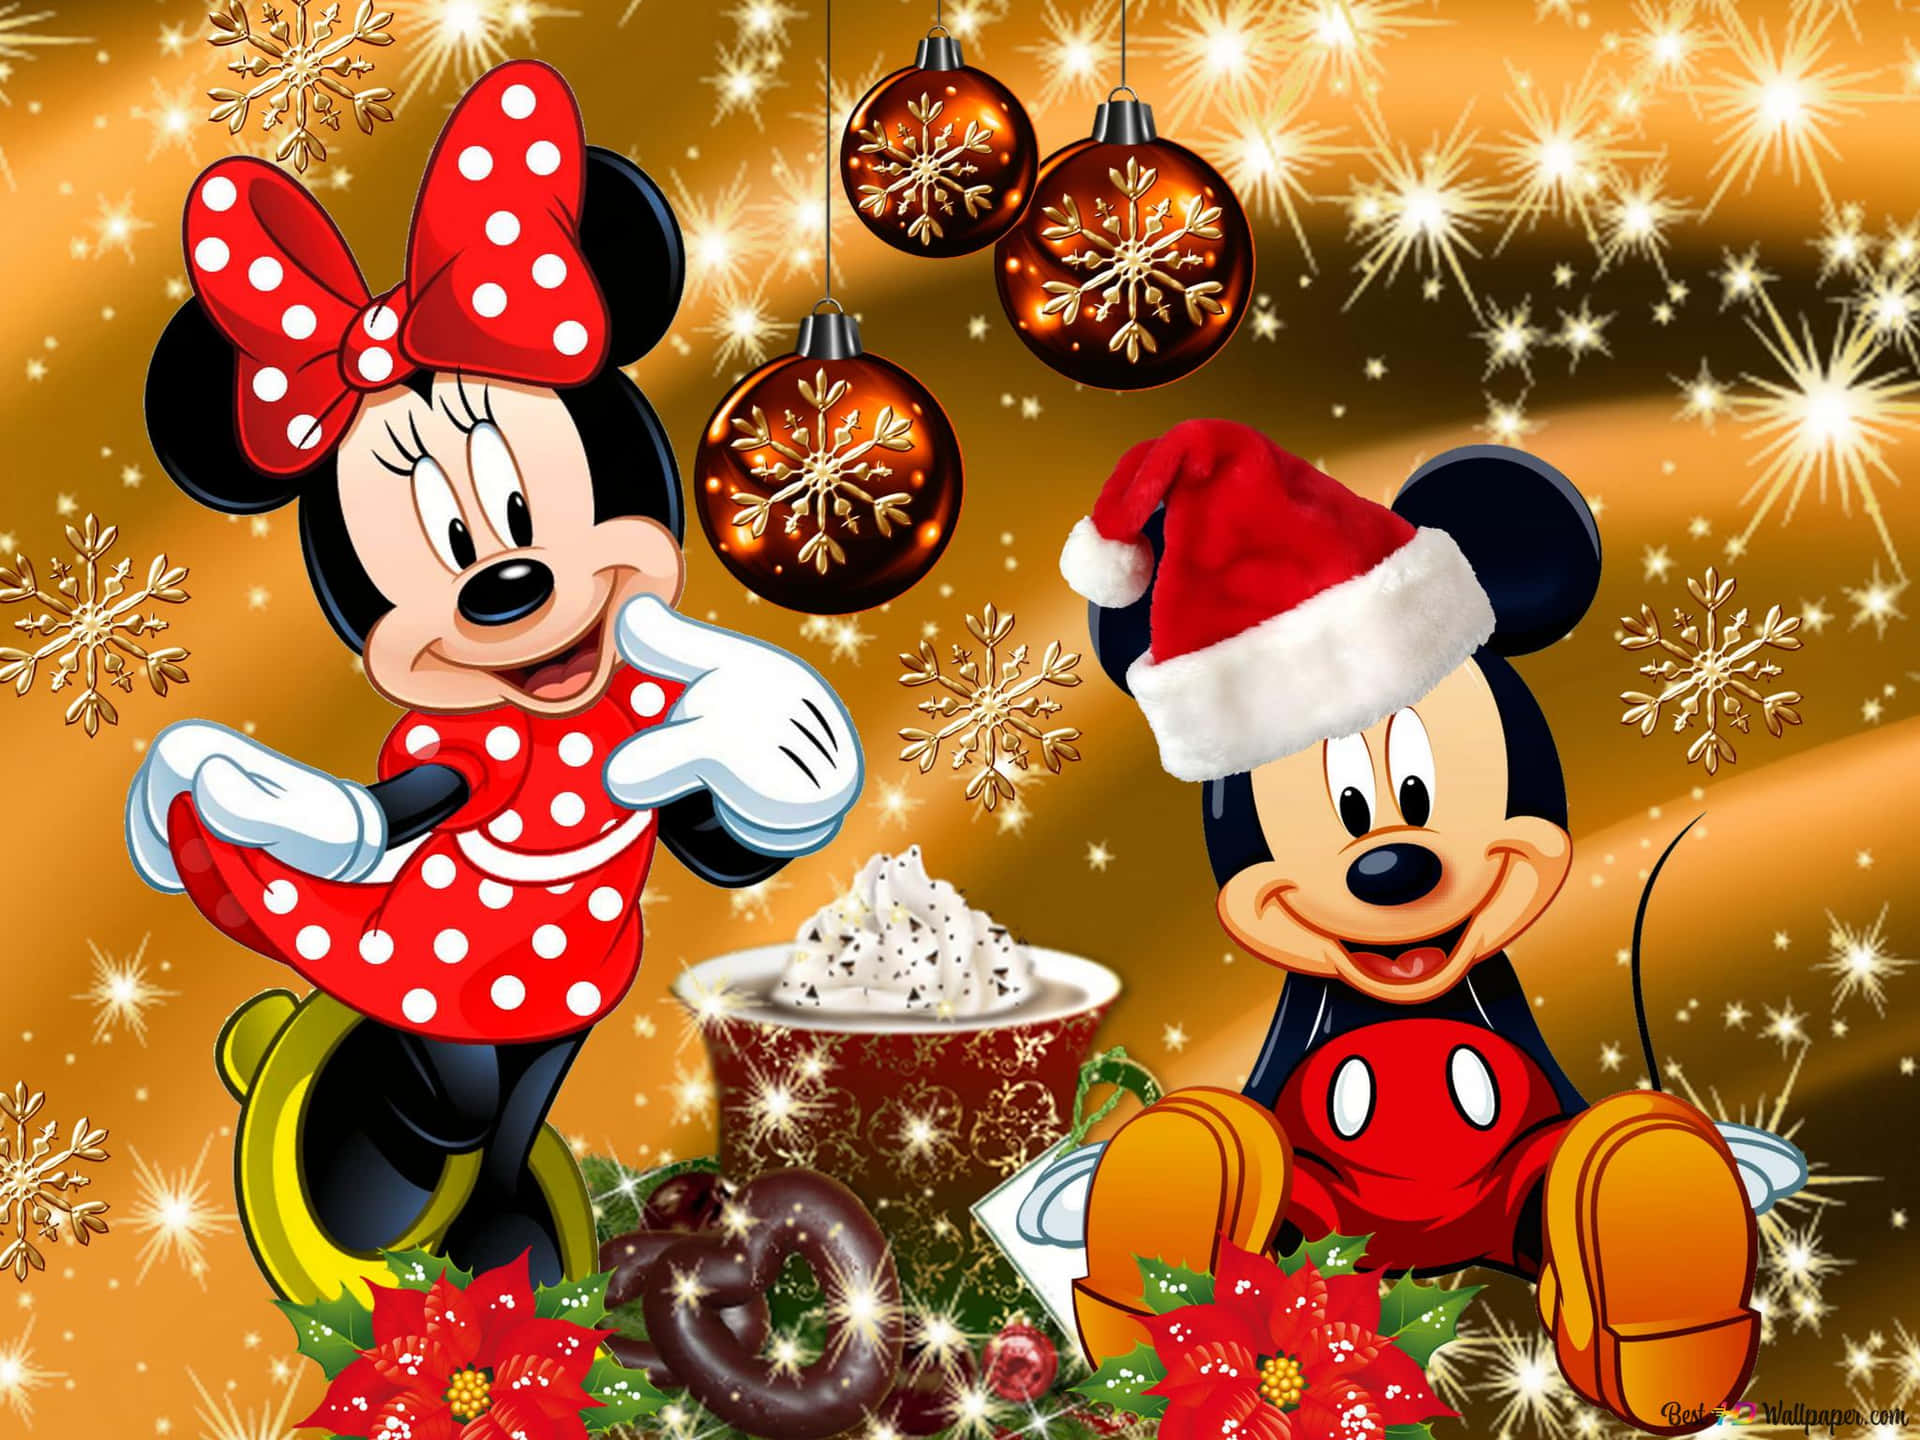 Mickey Mouse And Minnie Mouse In Christmas Decorations Wallpaper